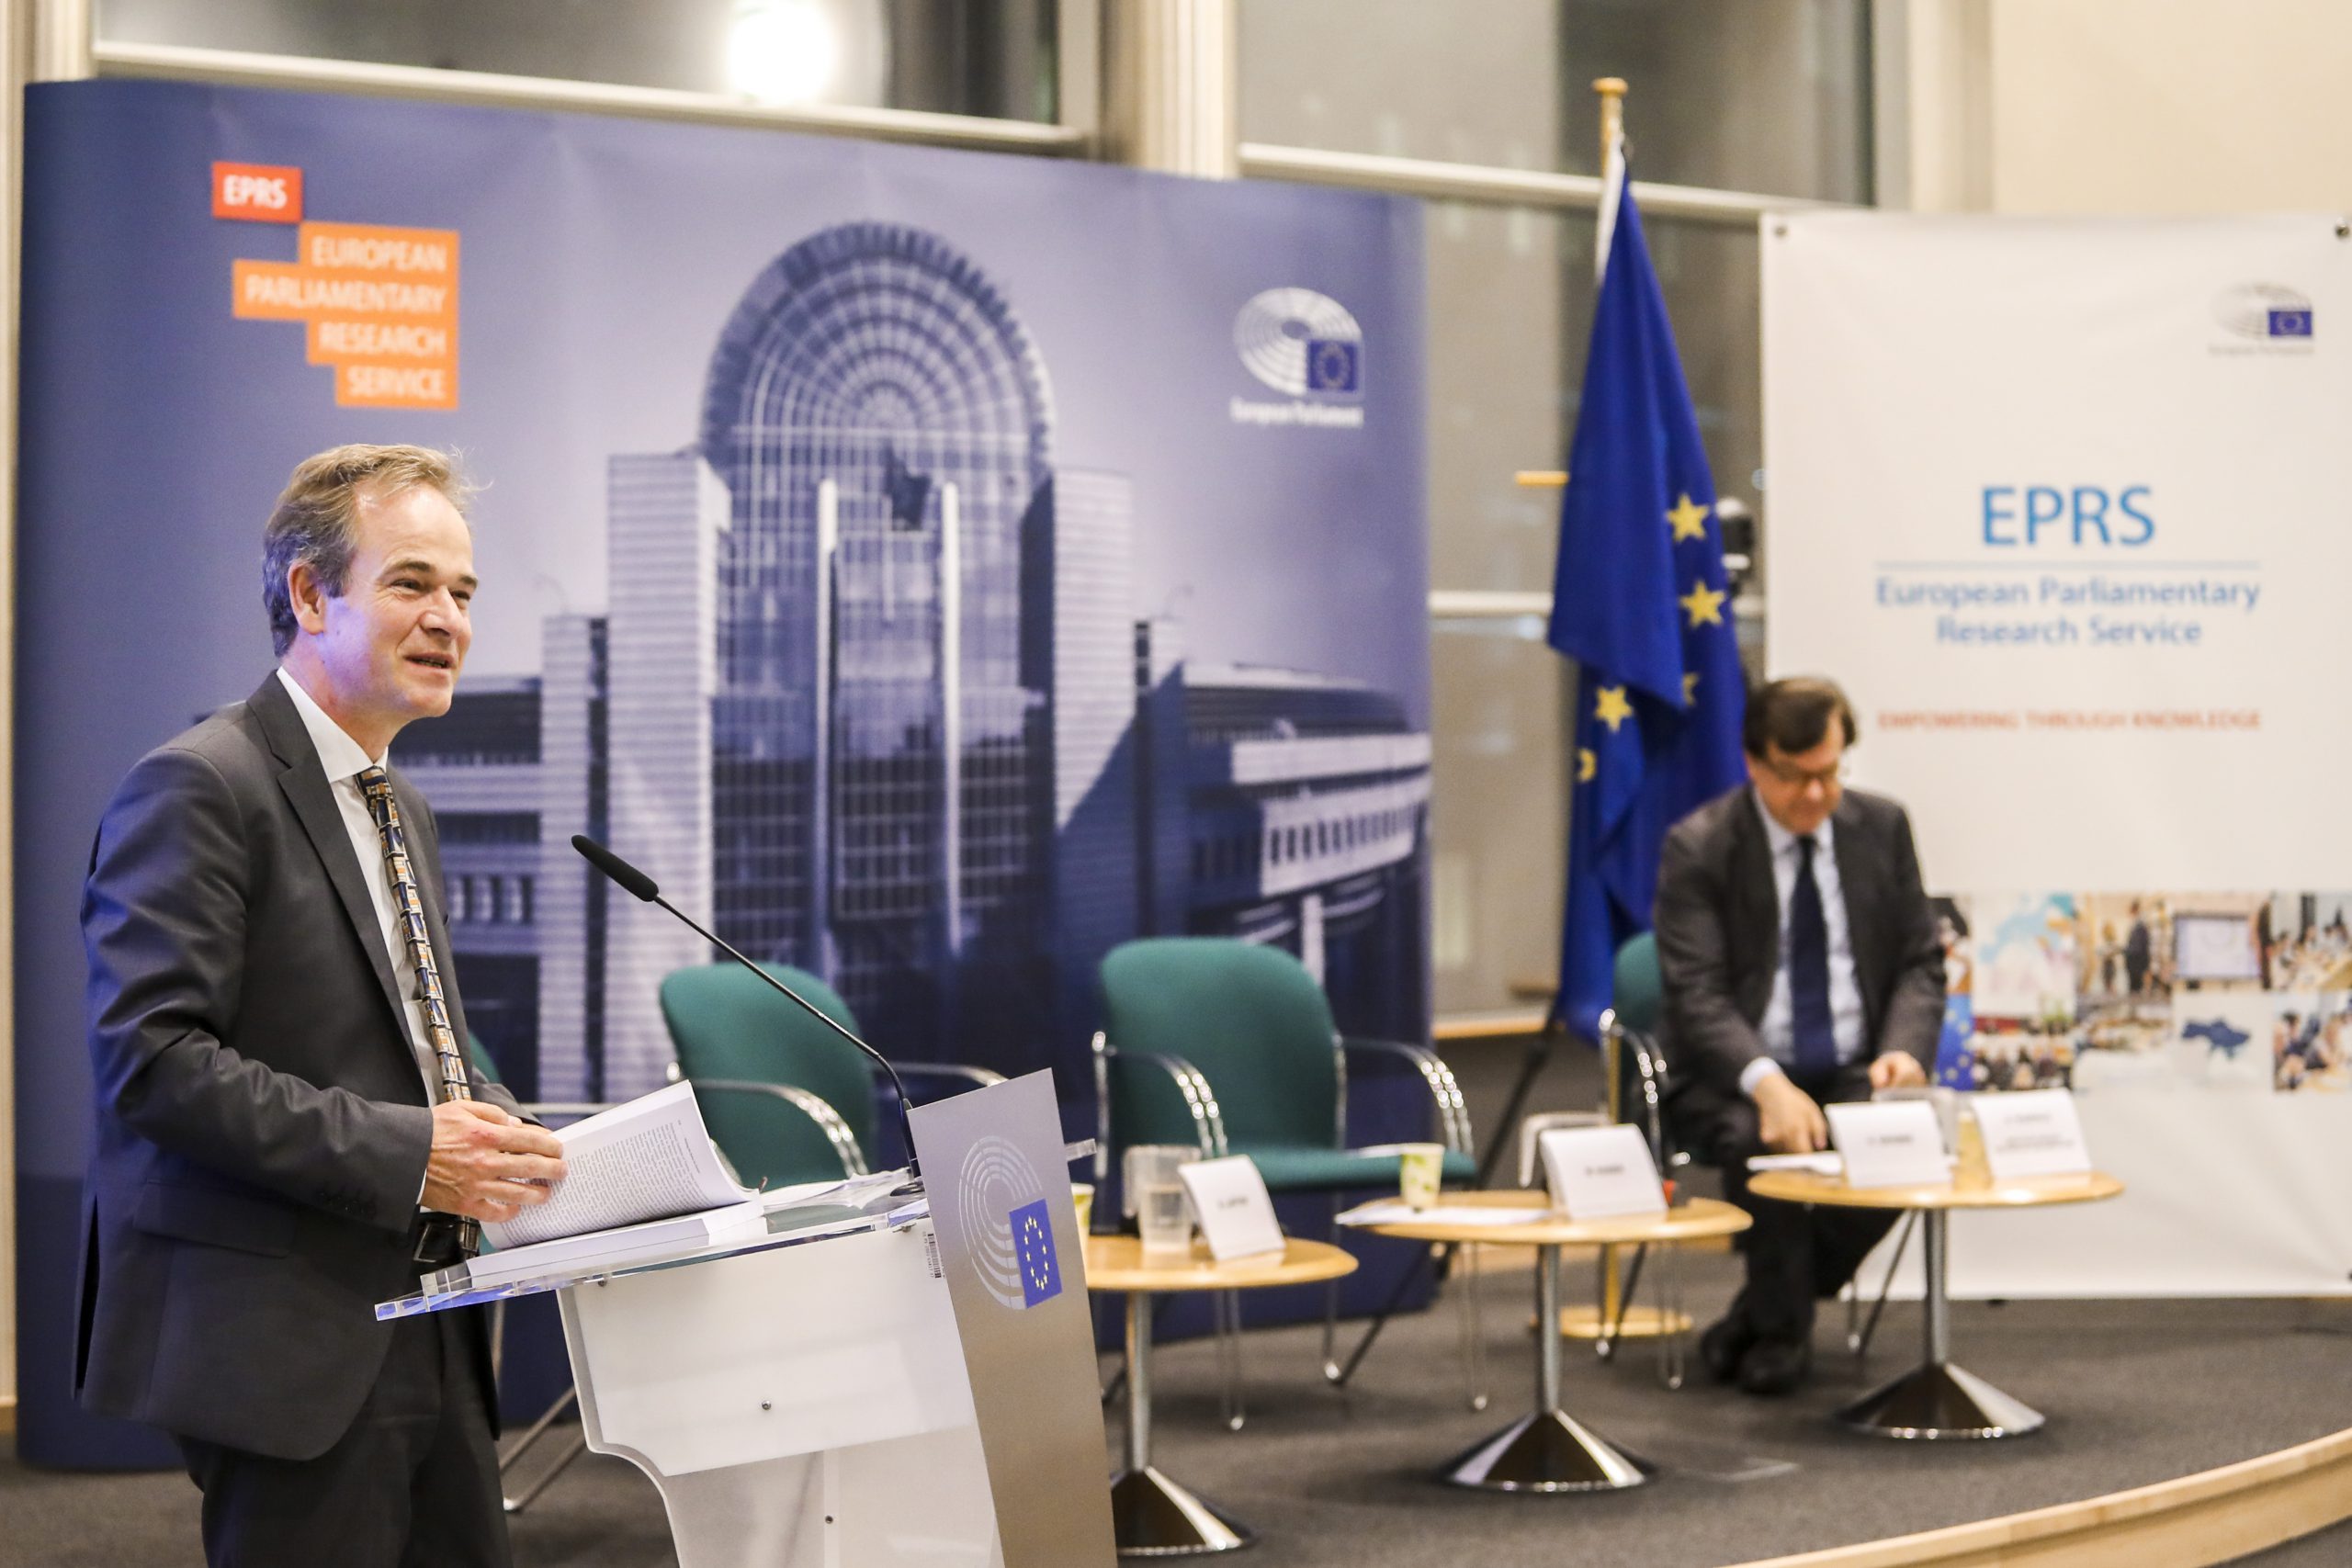 EPRS Annual Lecture 2019 – Clash of cultures: Transnational governance in post-war Europe